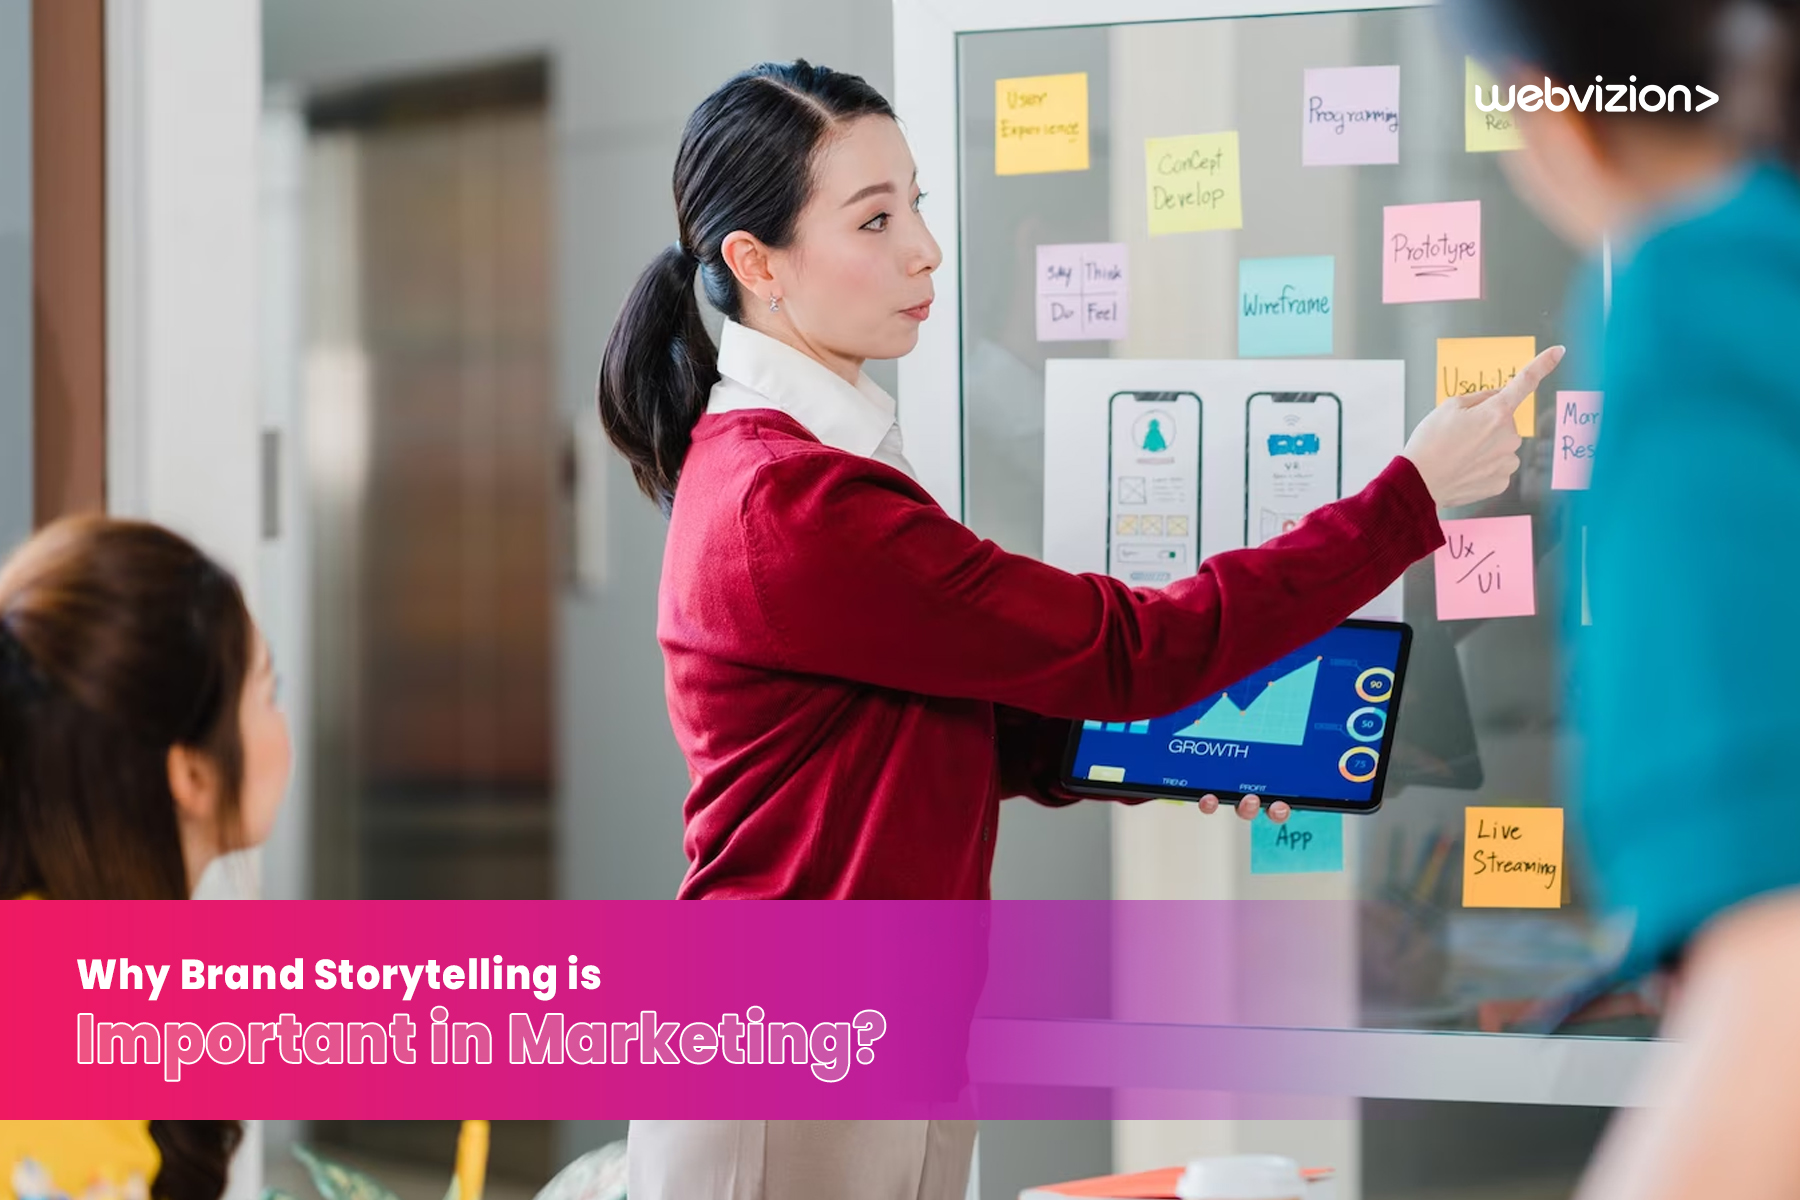 why-brand-storytelling-is-important-in-marketing-webvizion-global